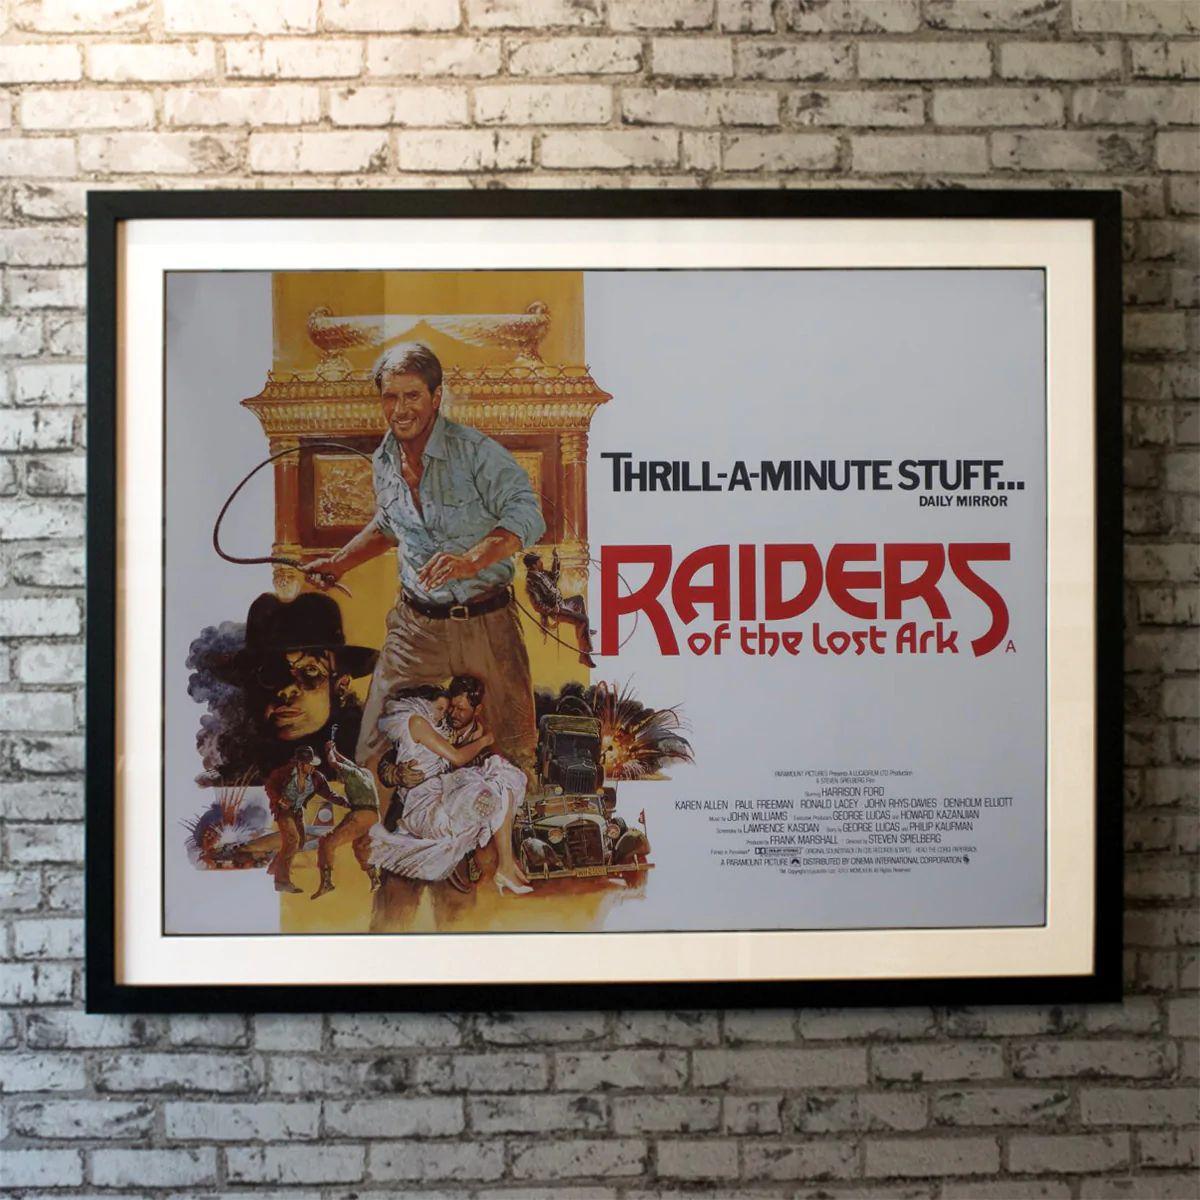 Raiders of The Lost Ark, Unframed Poster, 1981

Original British Quad (30 X 40 Inches). Archaeology professor Indiana Jones ventures to seize a biblical artefact known as the Ark of the Covenant. While doing so, he puts up a fight against Renee and